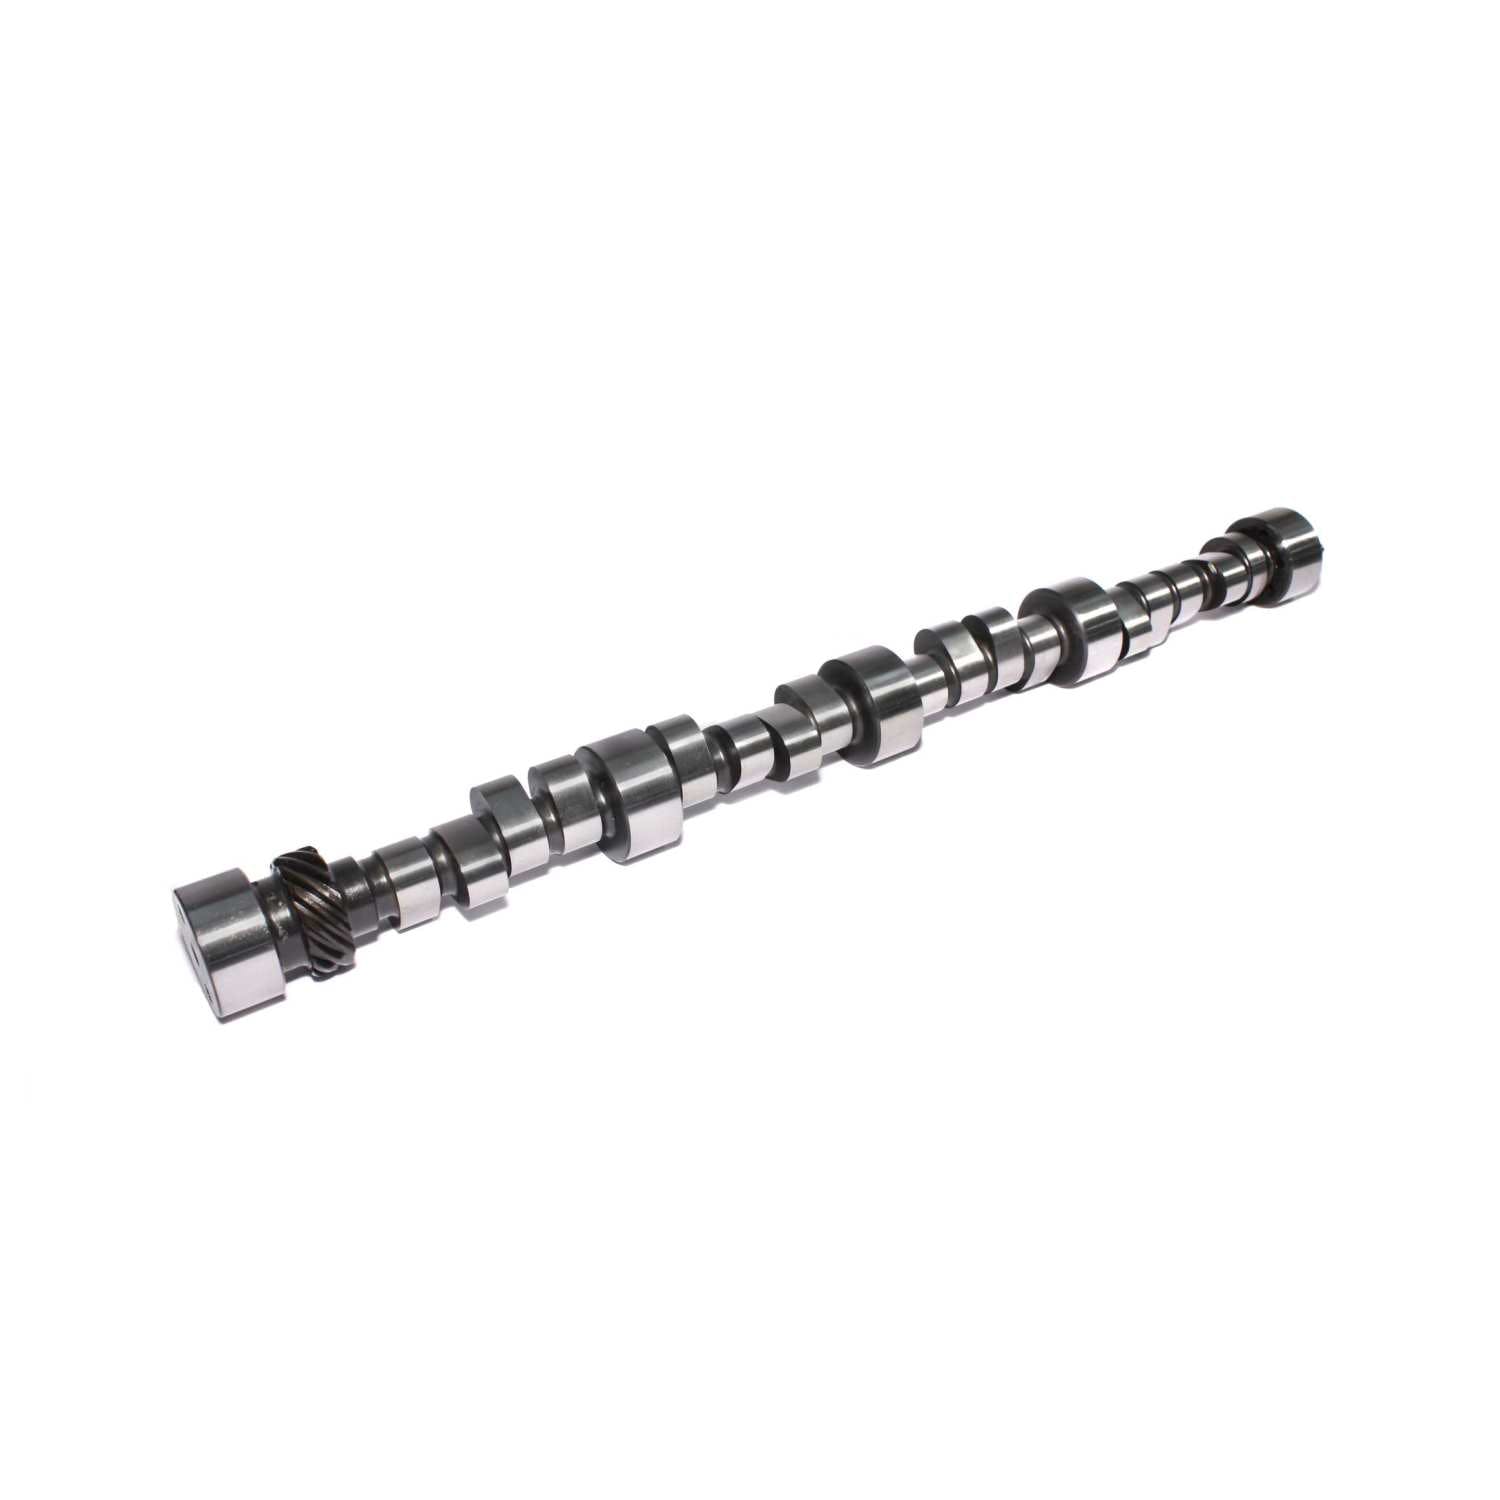 Competition Cams 11-727-9 Drag Race Camshaft